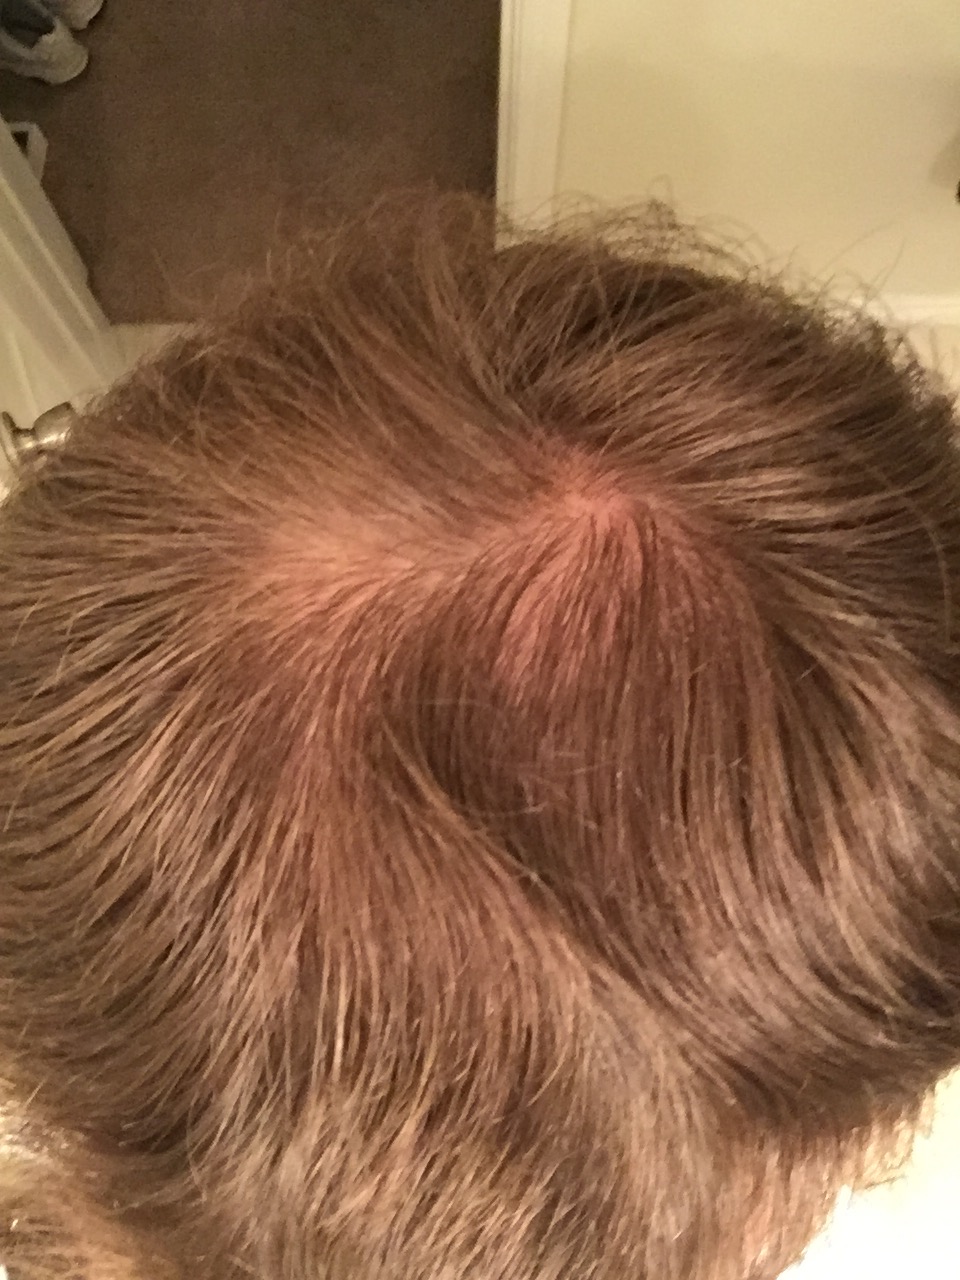 21 and mild hair loss | HairLossTalk Forums